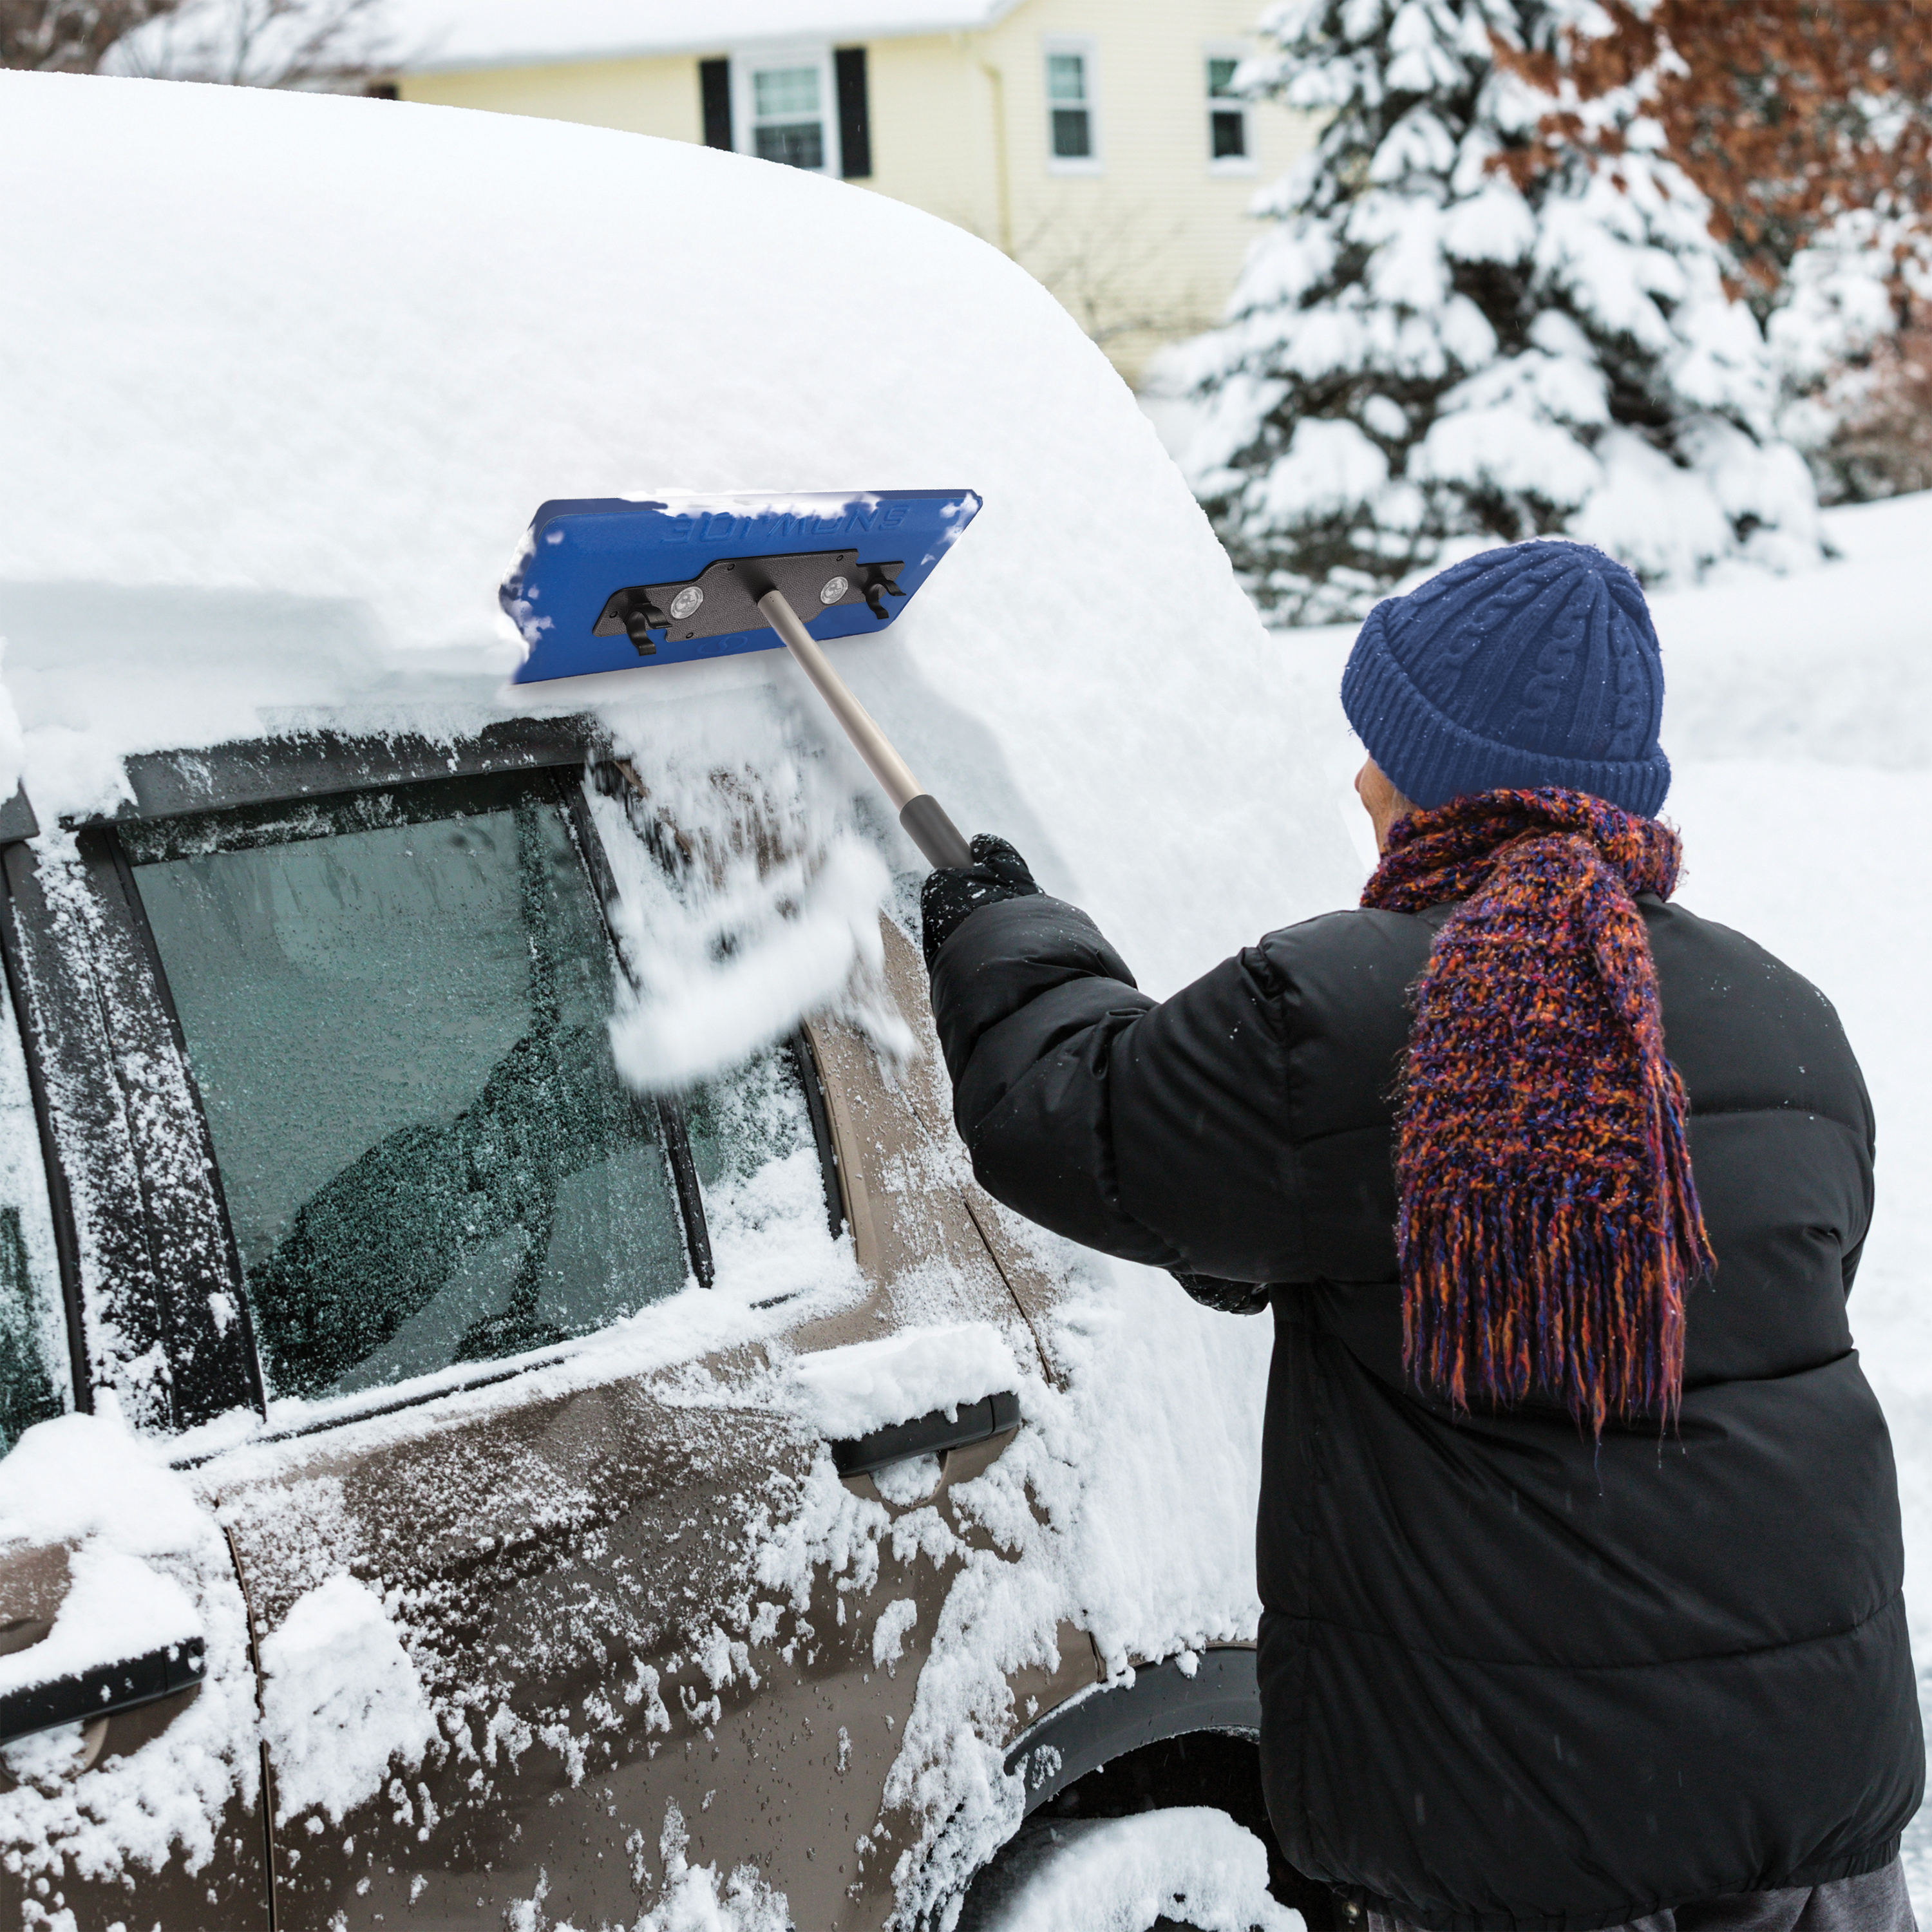 This Ice Scraper Is a Must-have for Winter Storms, Ice Scraper 